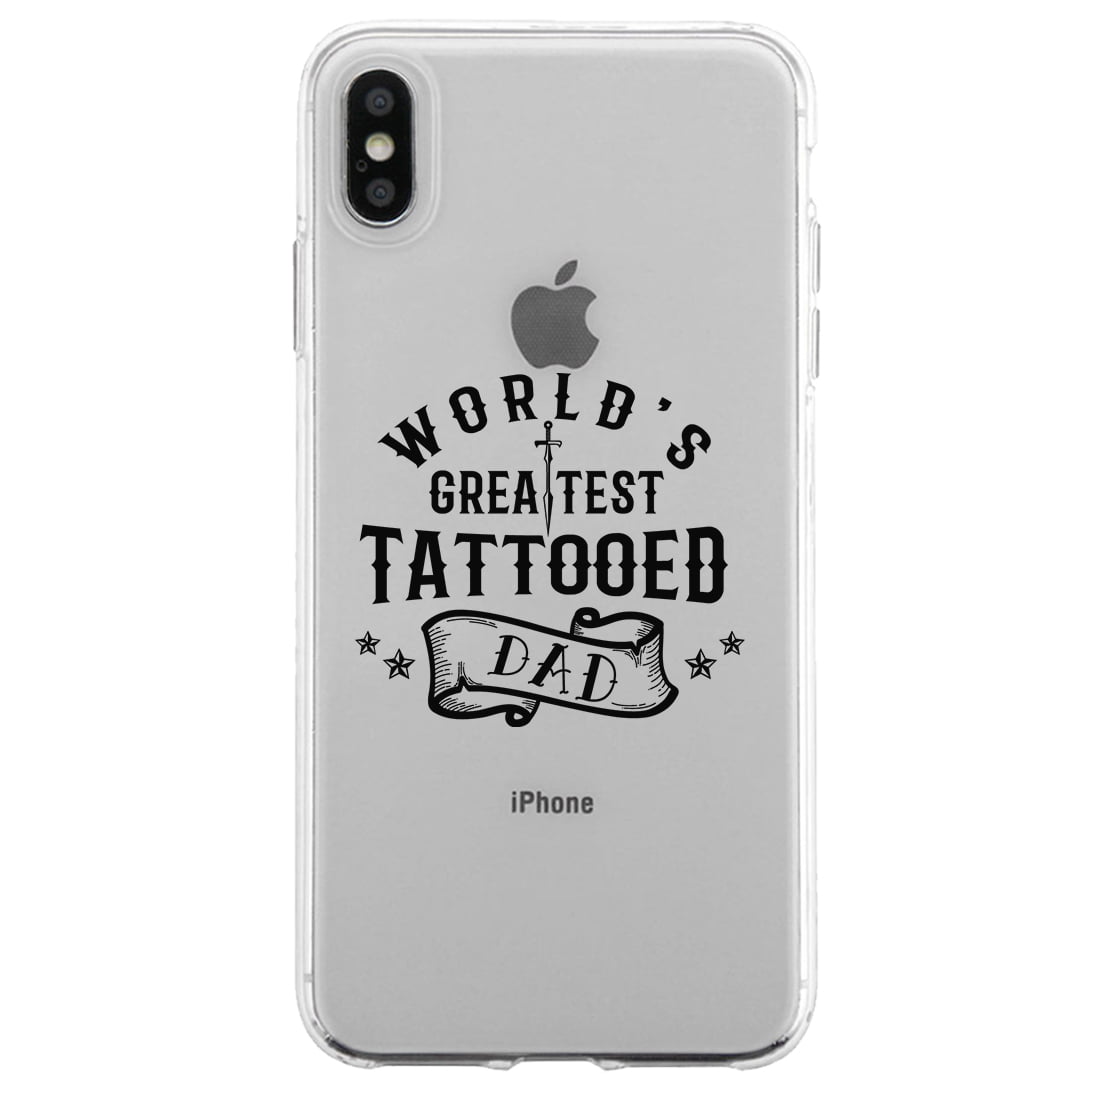 Details about   Greatest Tattooed Dad Case Tough Creative Unafraid Gift For Fathers